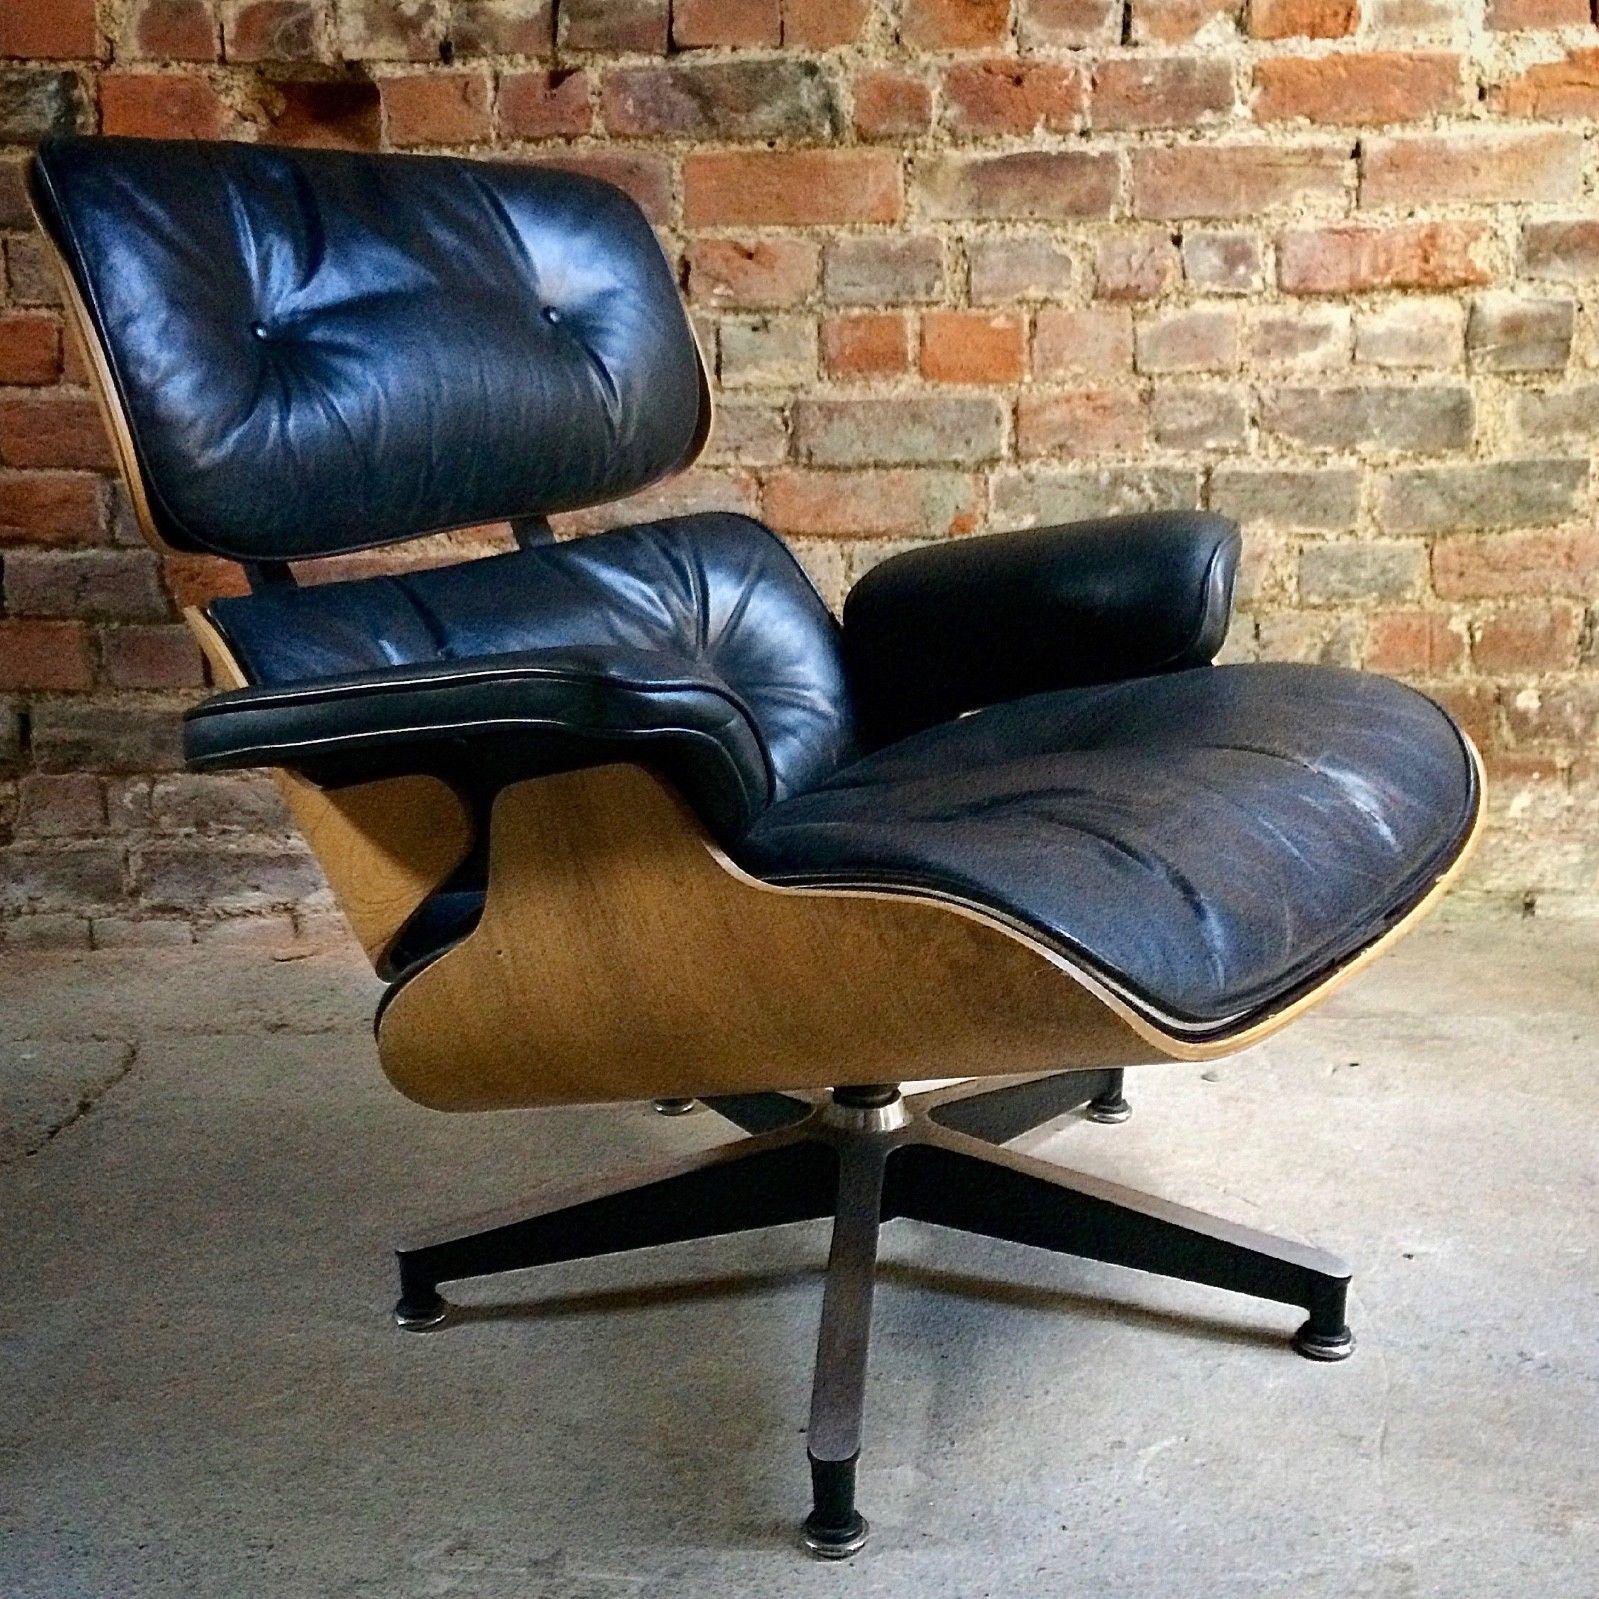 Original Herman Miller Charles & Ray Eames designed 670 Lounge Chair with black leather upholstery and Rosewood frame dating to 1970s stamped Herman Miller

Charles & Ray Eames wanted their lounge chair and ottoman to have the “warm receptive look